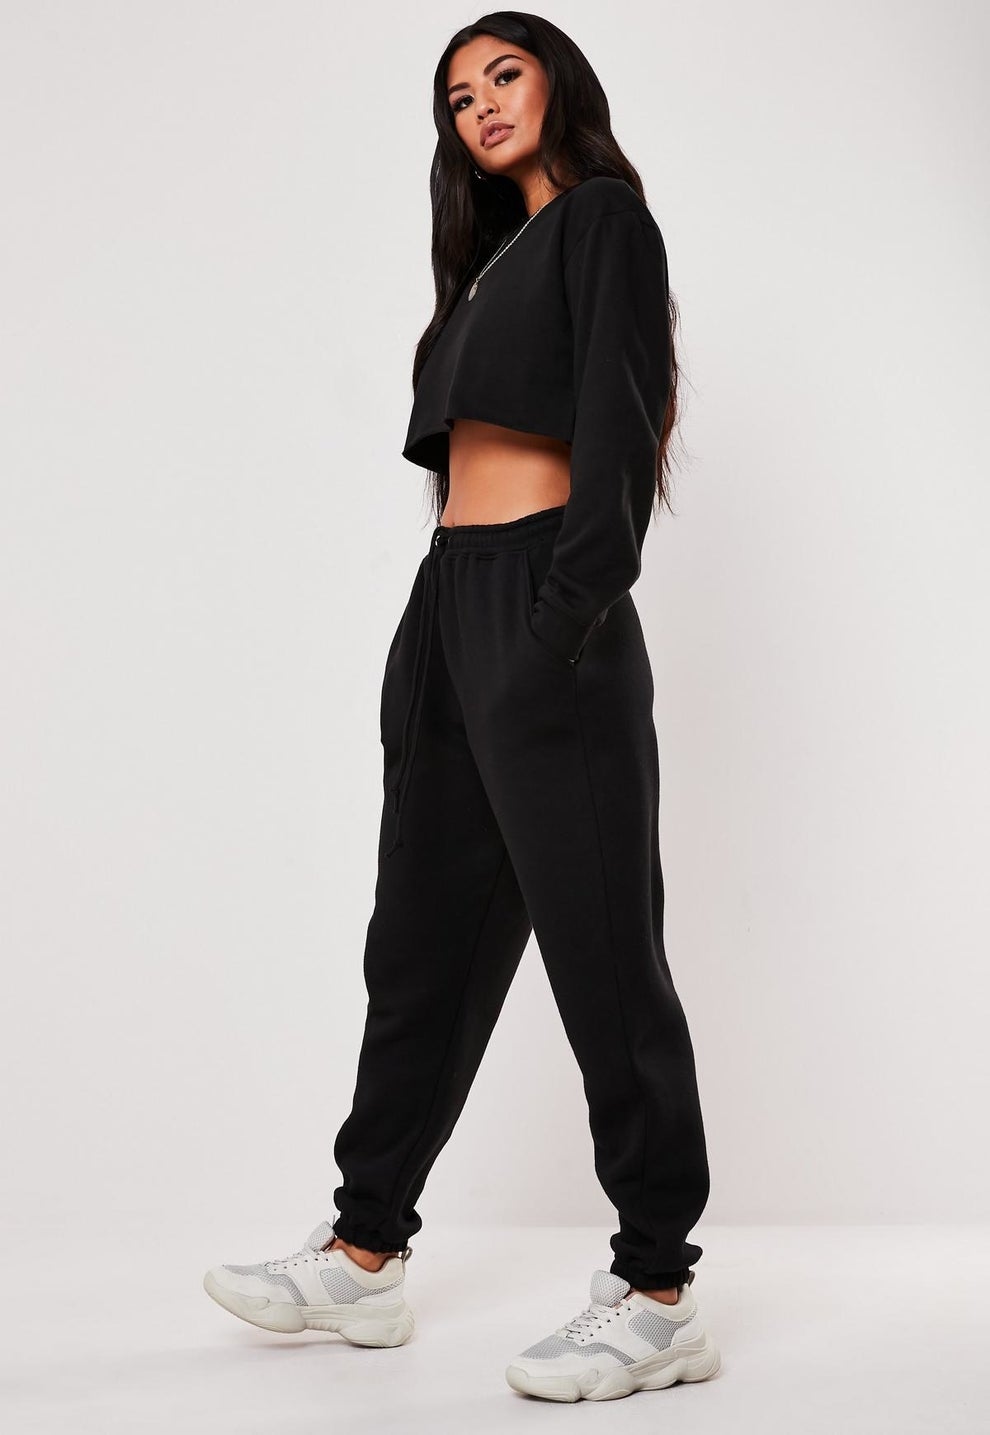 Just 19 Incredibly Comfortable Pairs Of Sweatpants